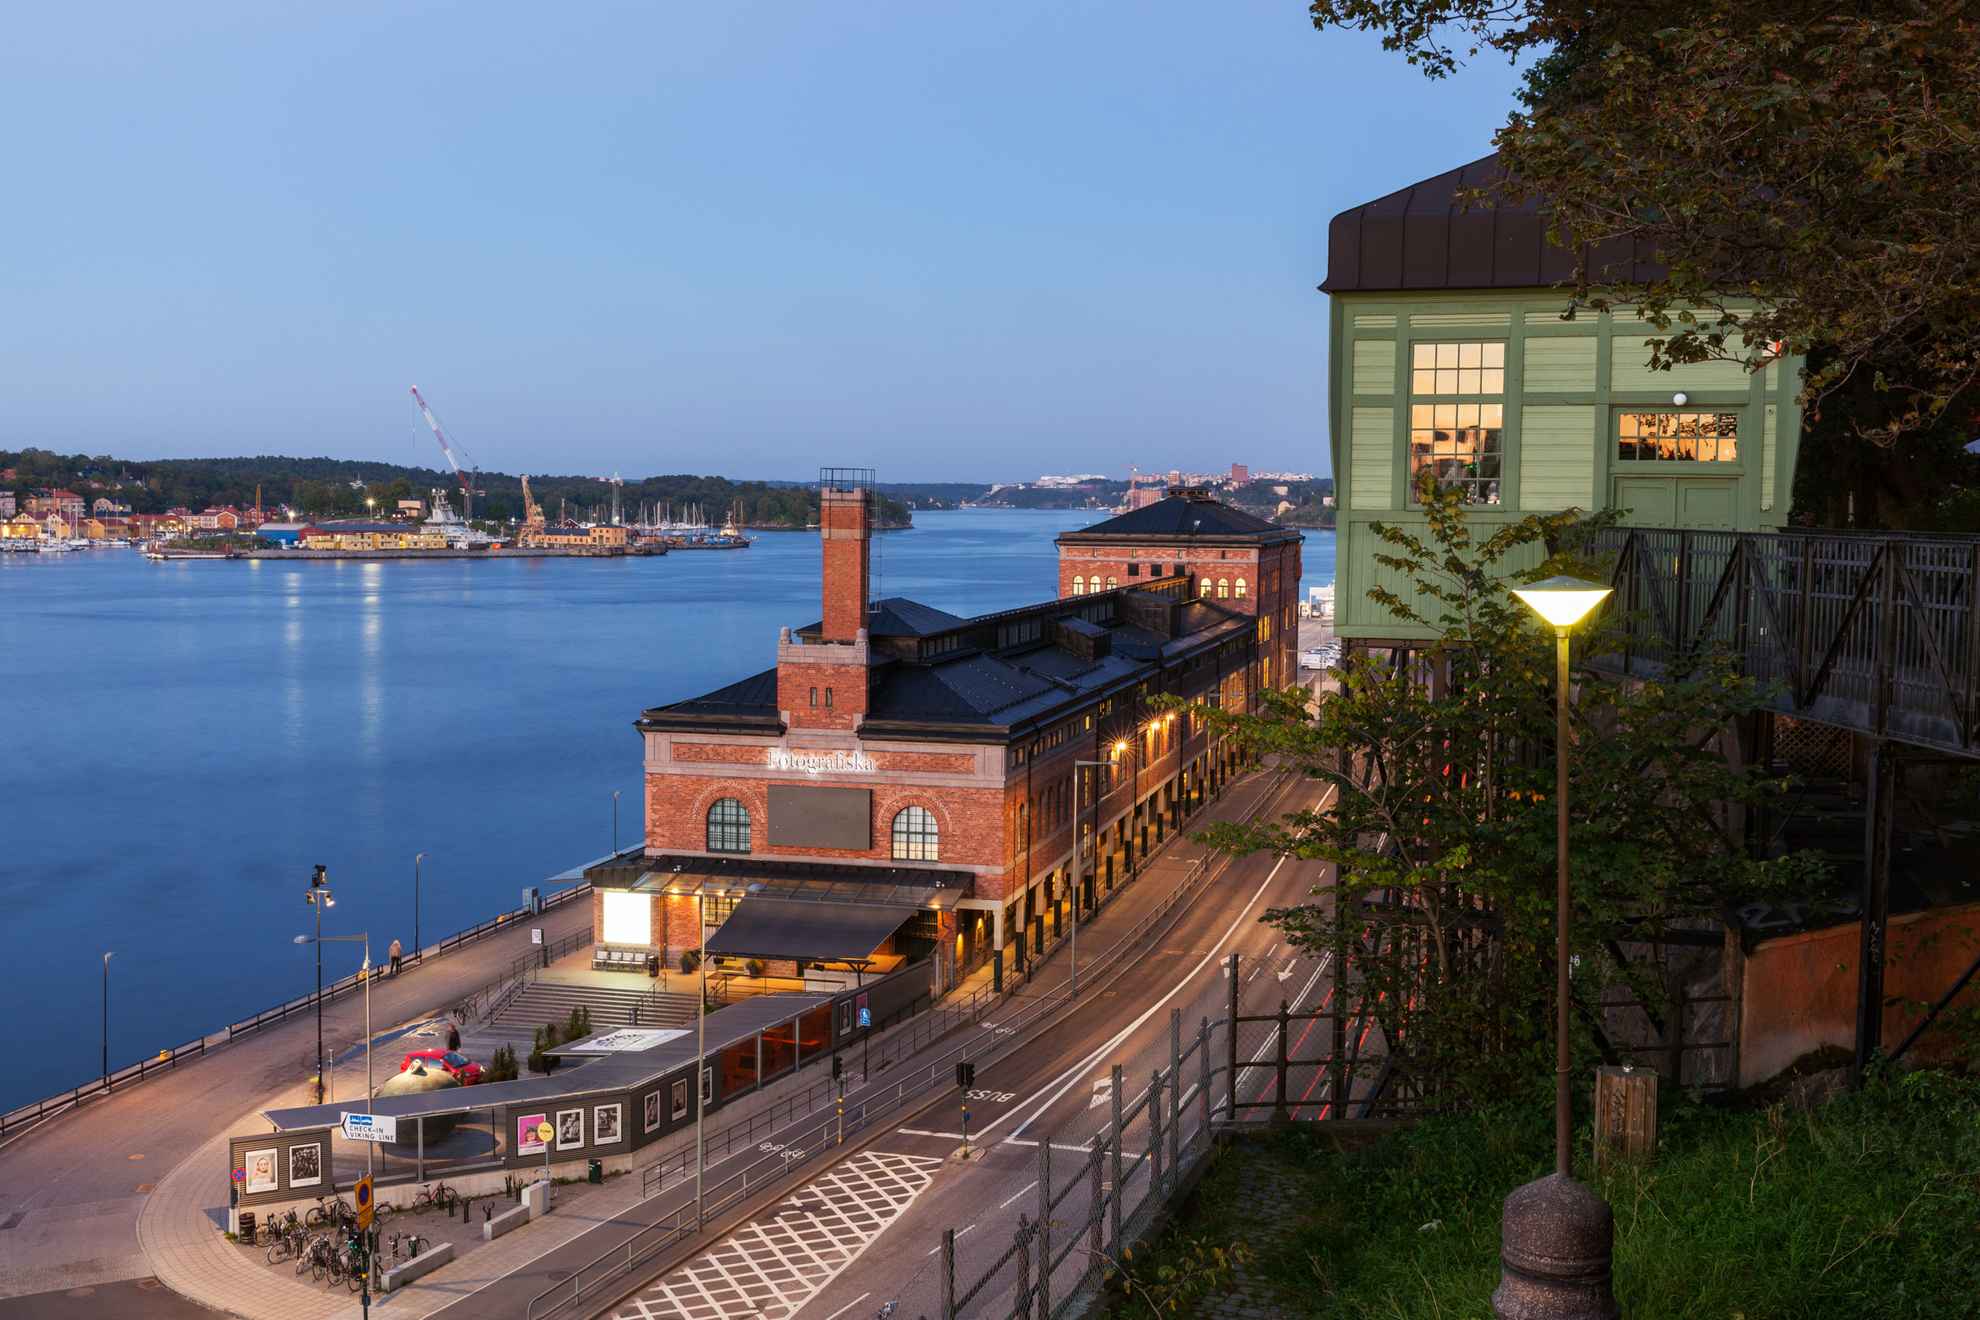 The museum Fotografiska, seen from the hill above. The sea and parts of Stockholm in the background.